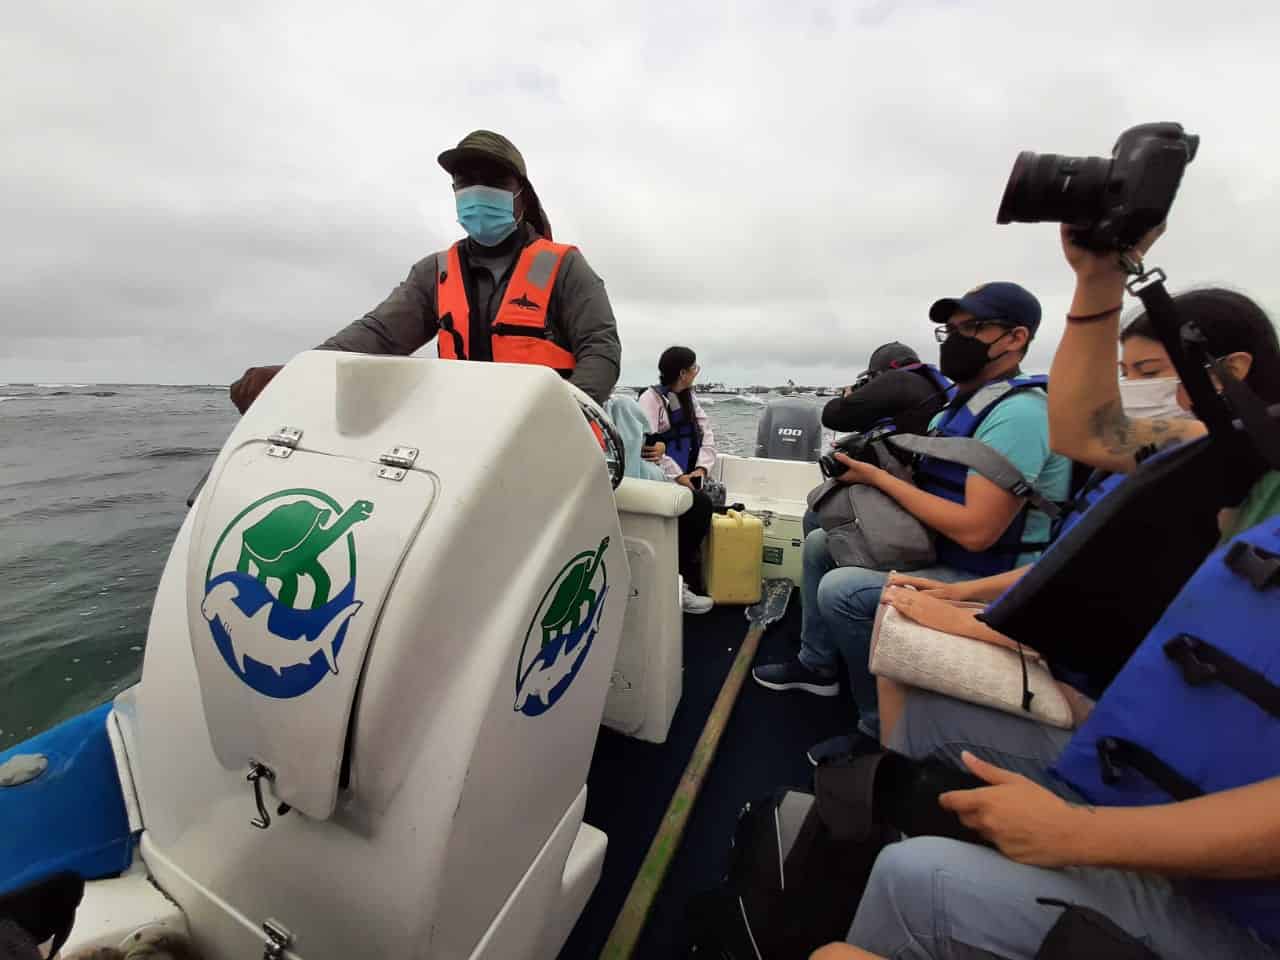 Journalists photograph on a boat.